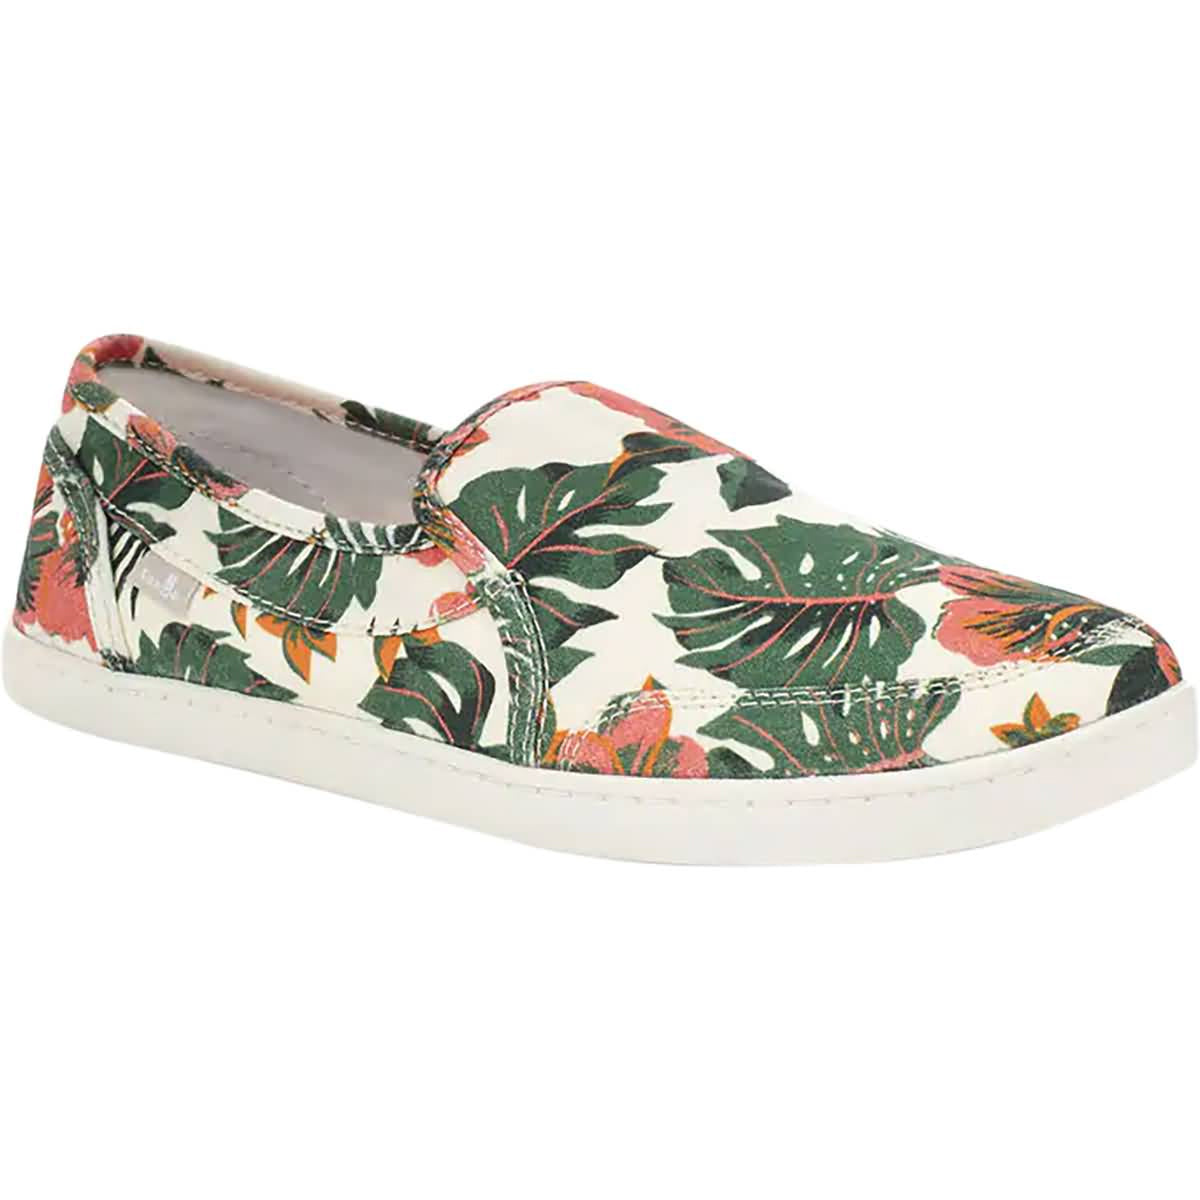 Sanuk Pair O Dice Floral Women's Shoes Footwear (Brand New